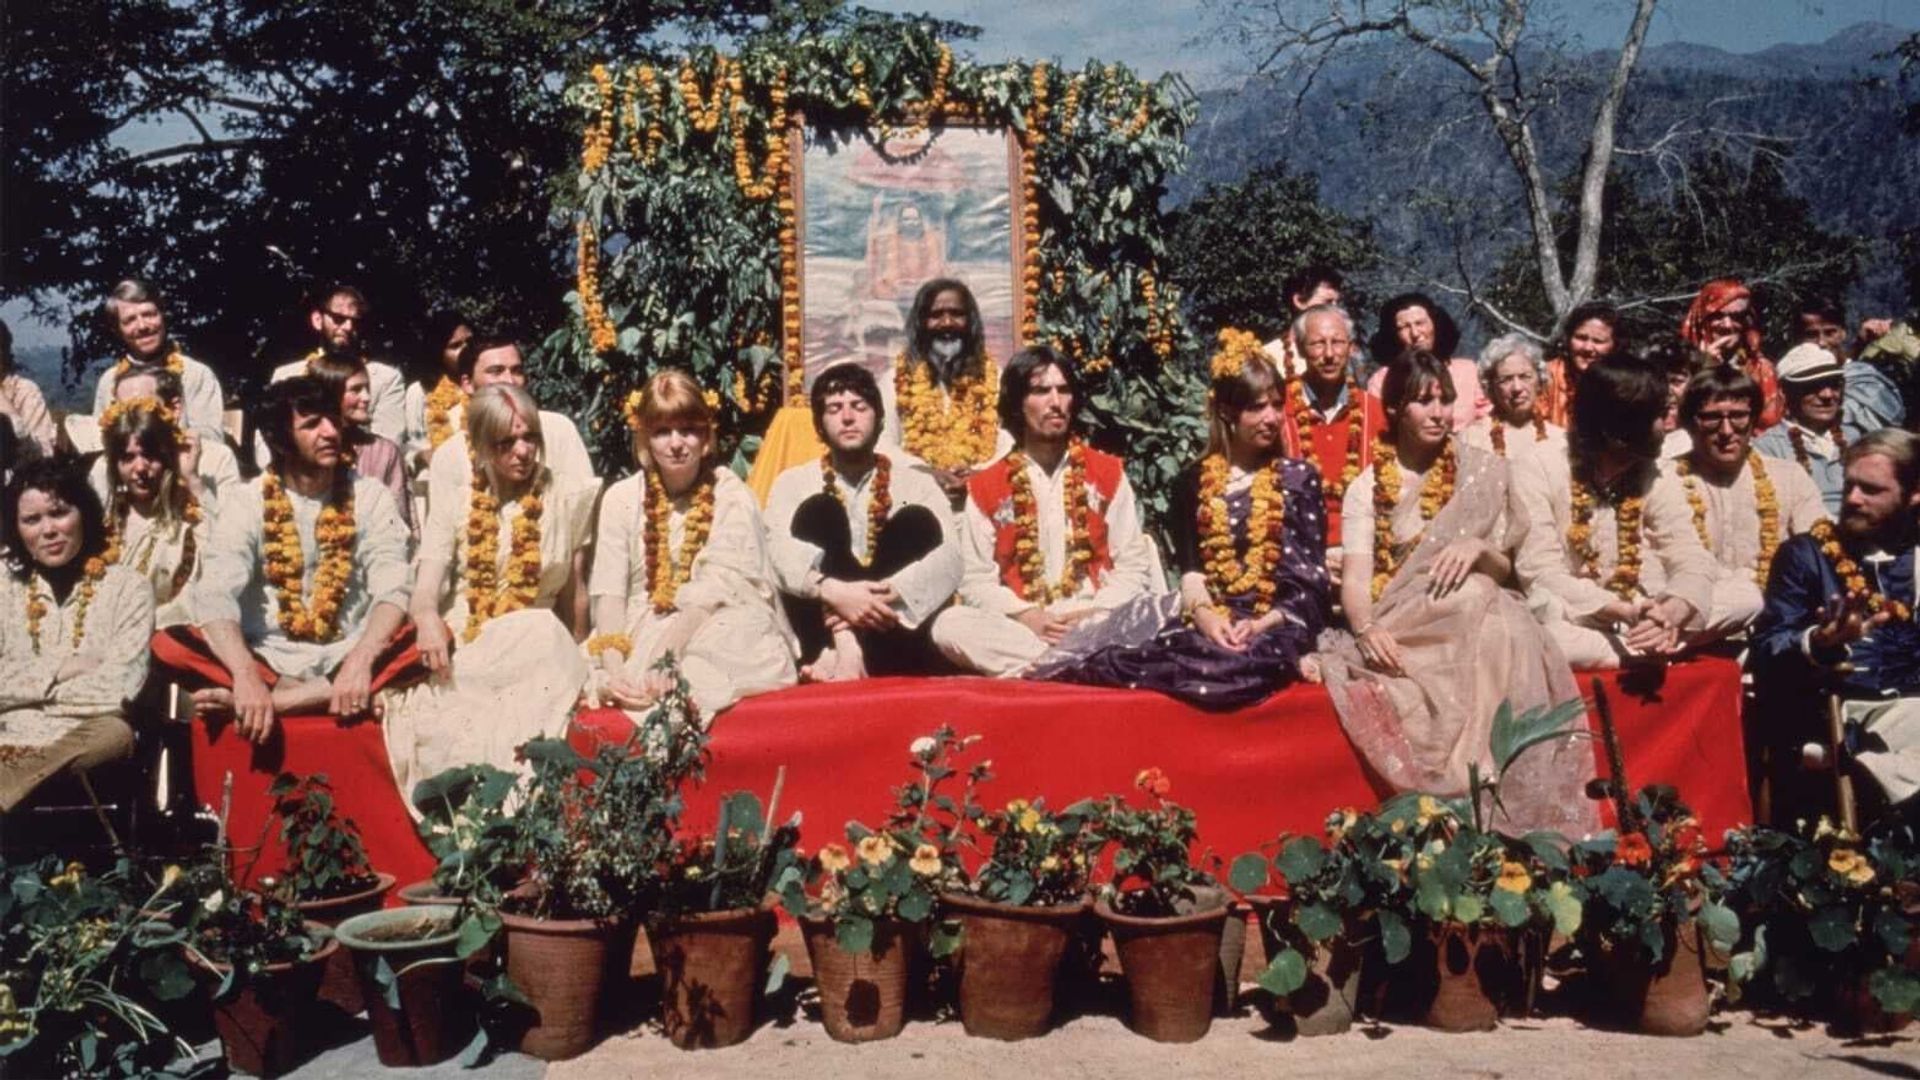 Meeting the Beatles in India background